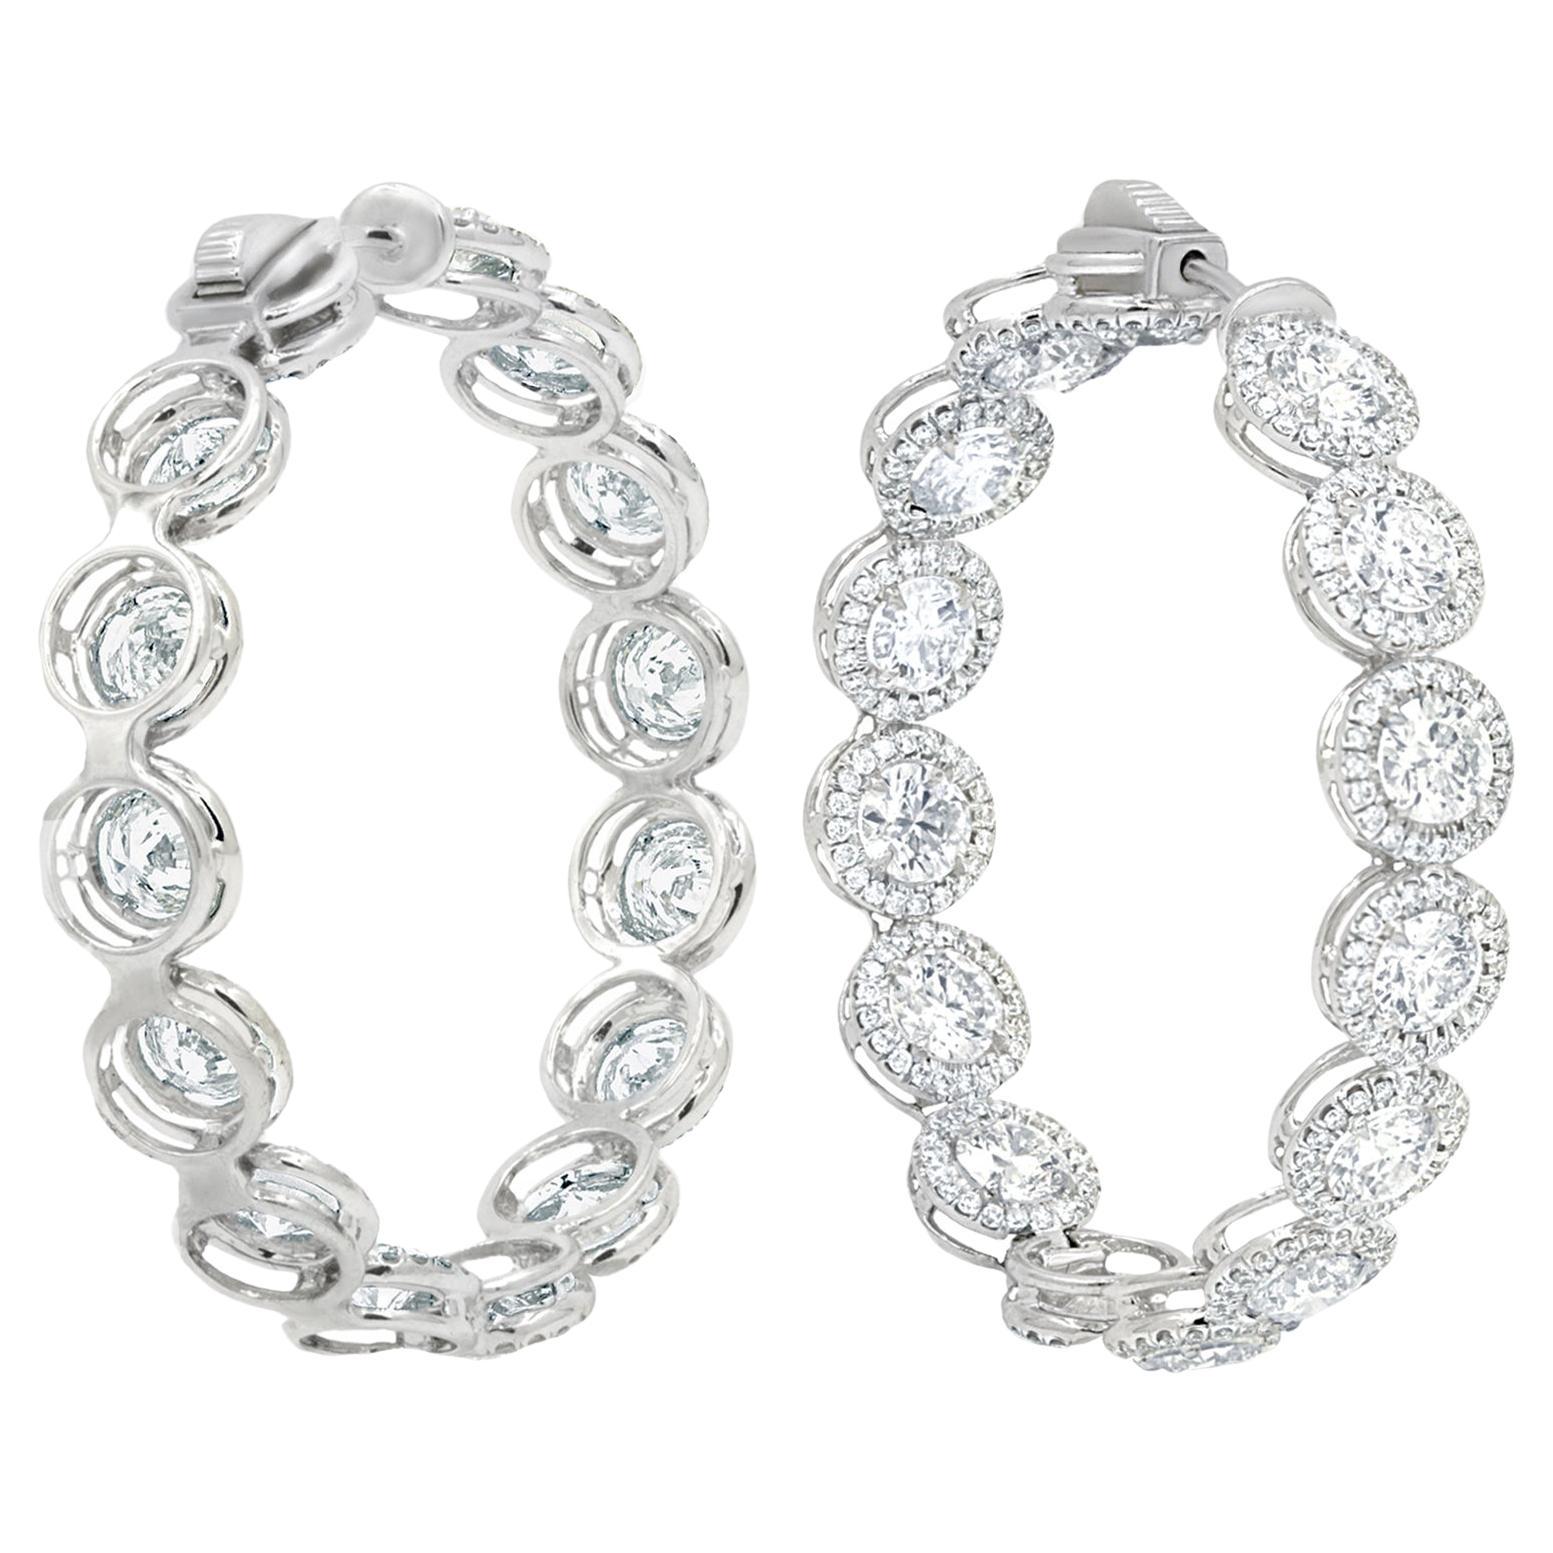 Diana M. 18 kt white gold inside-out hoop earrings with a halo design